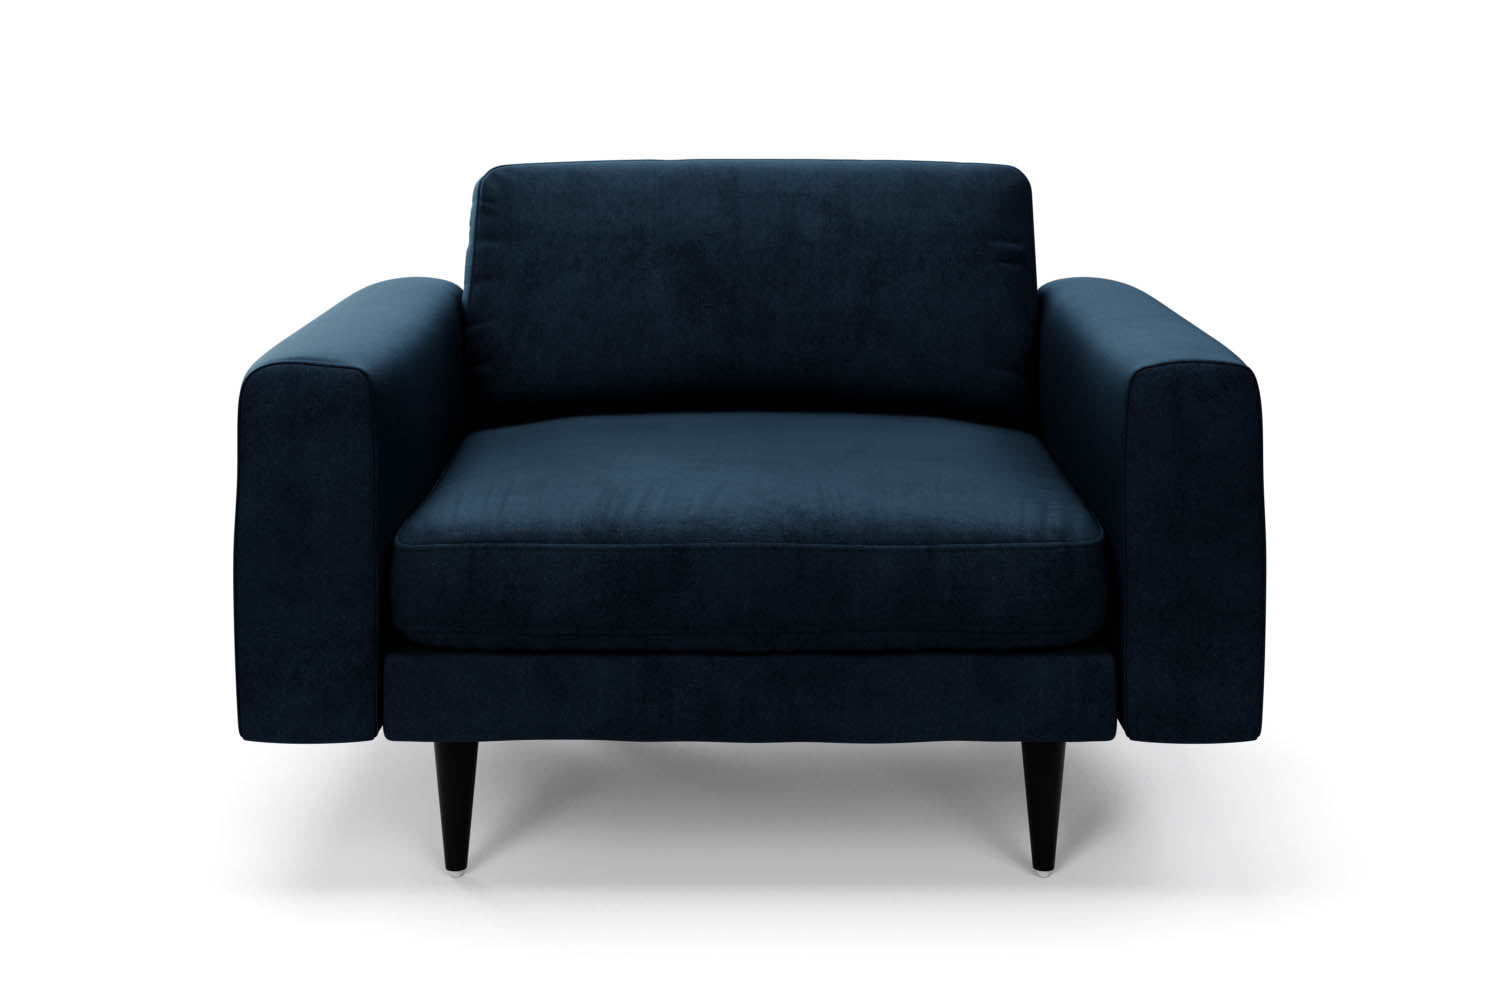 SNUG | The Big Chill 1.5 Seater Snuggler in Deep Blue variant_40837172330544